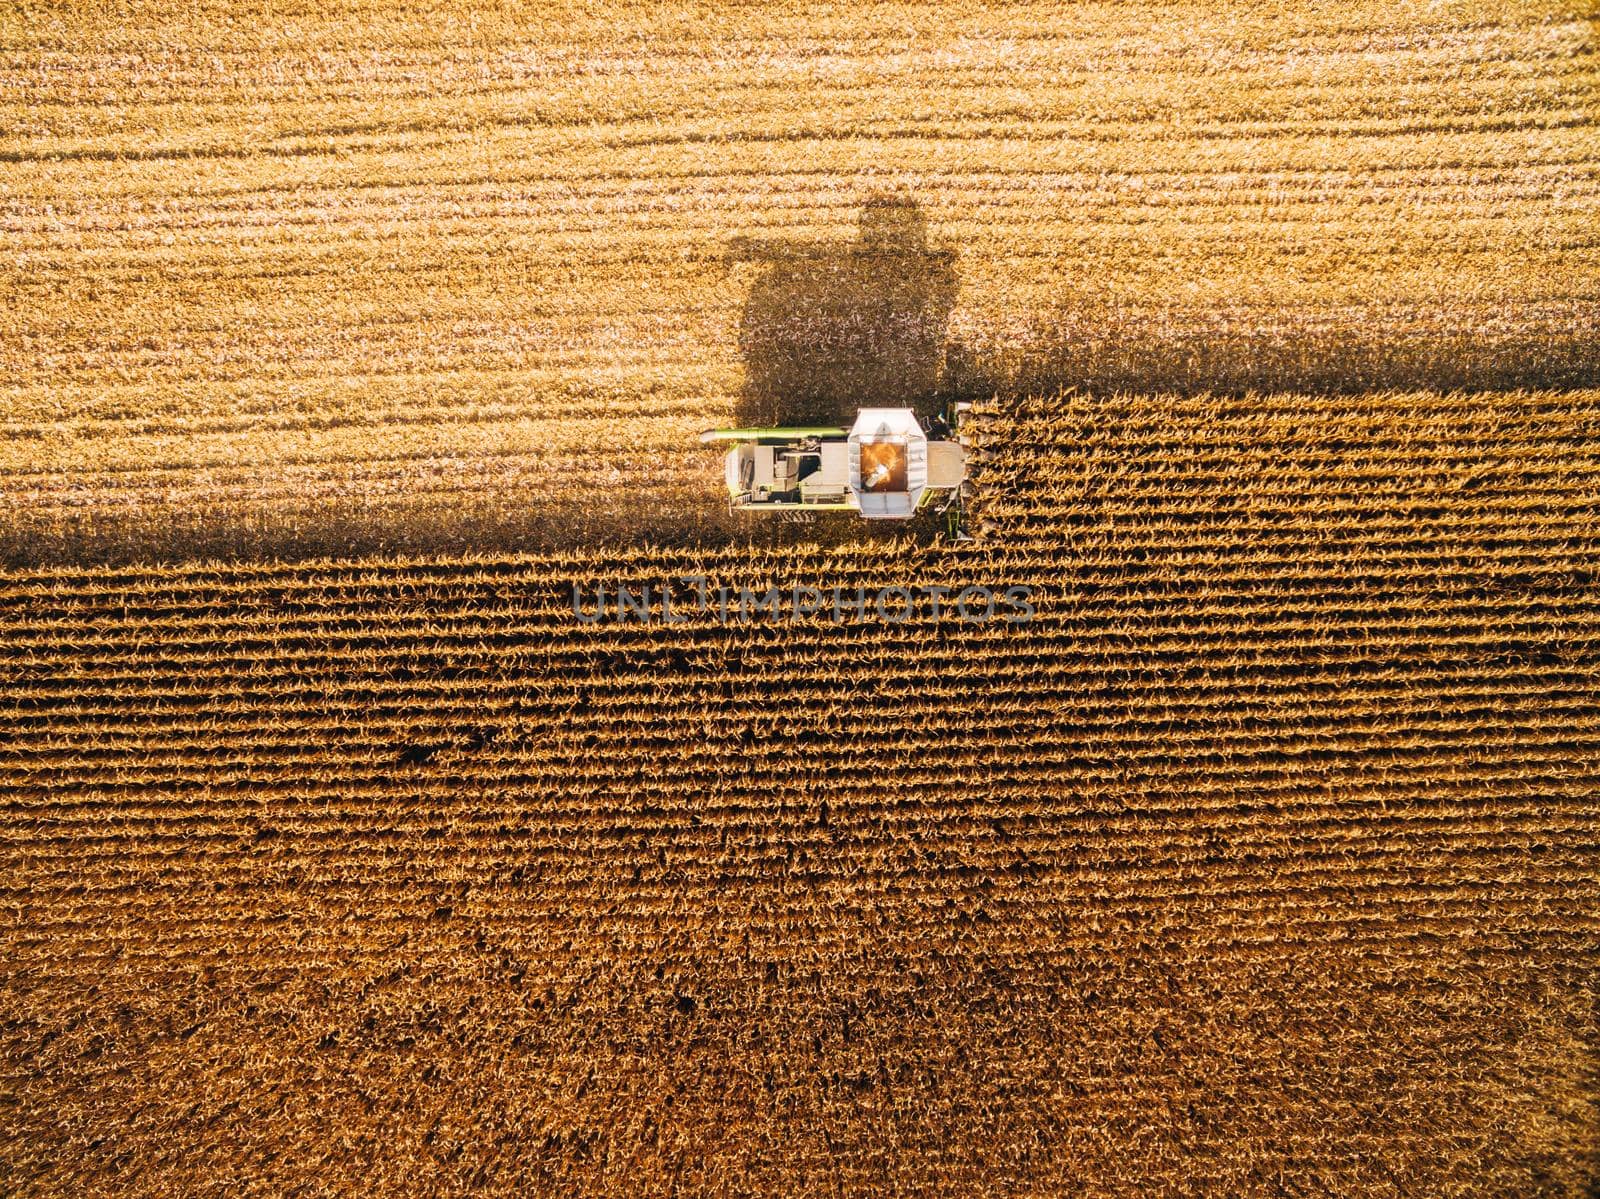 Harvesting Corn in the Green Field. Aerial photography over Automated Combines